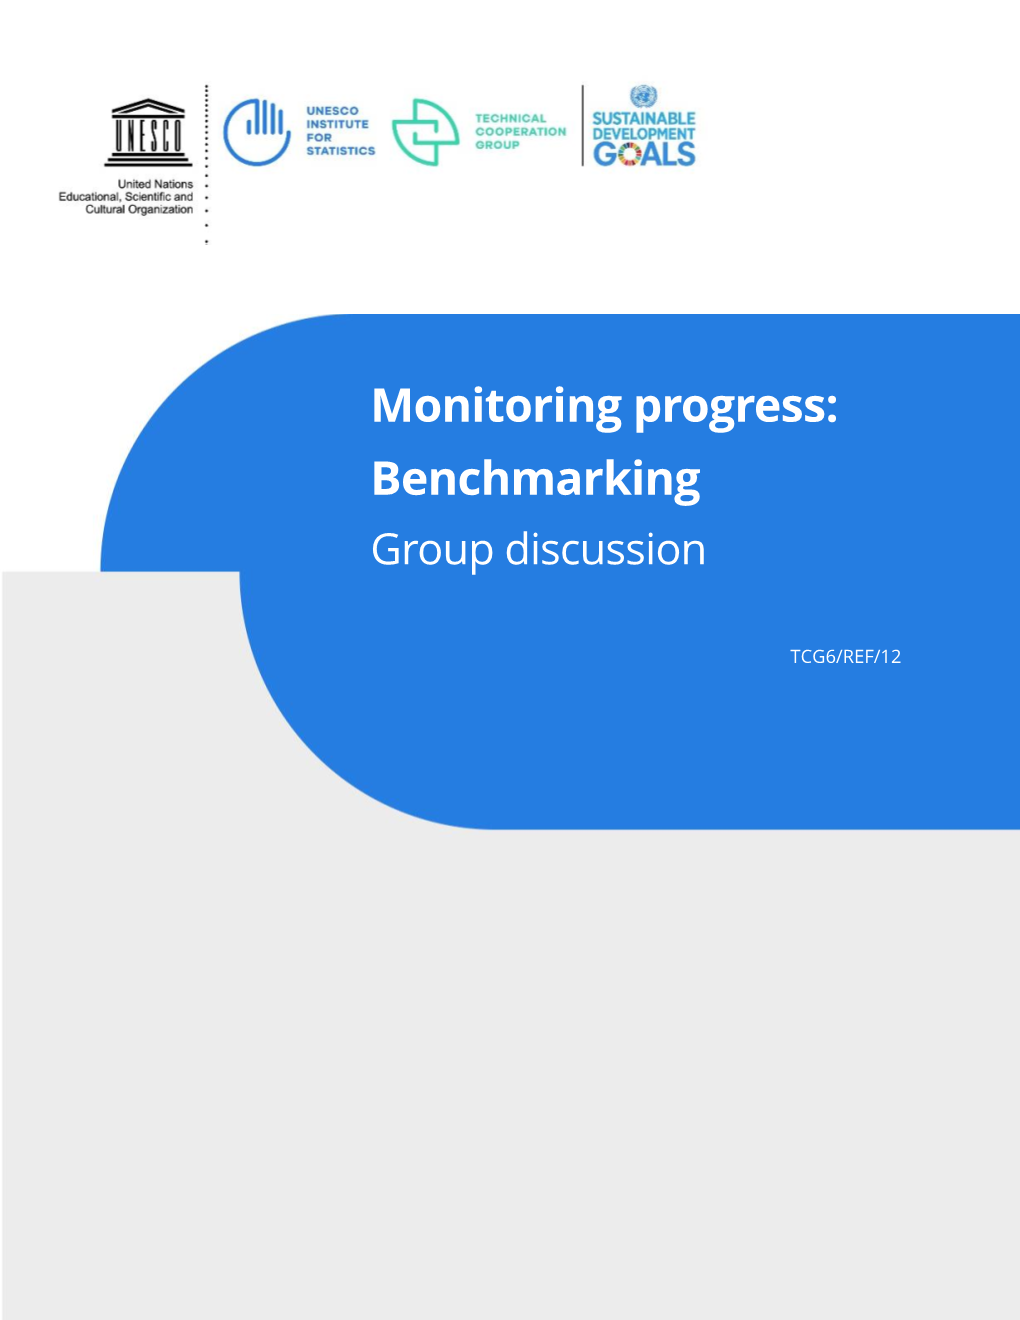 REF/12 Monitoring Progress: Benchmarking Group Discussion